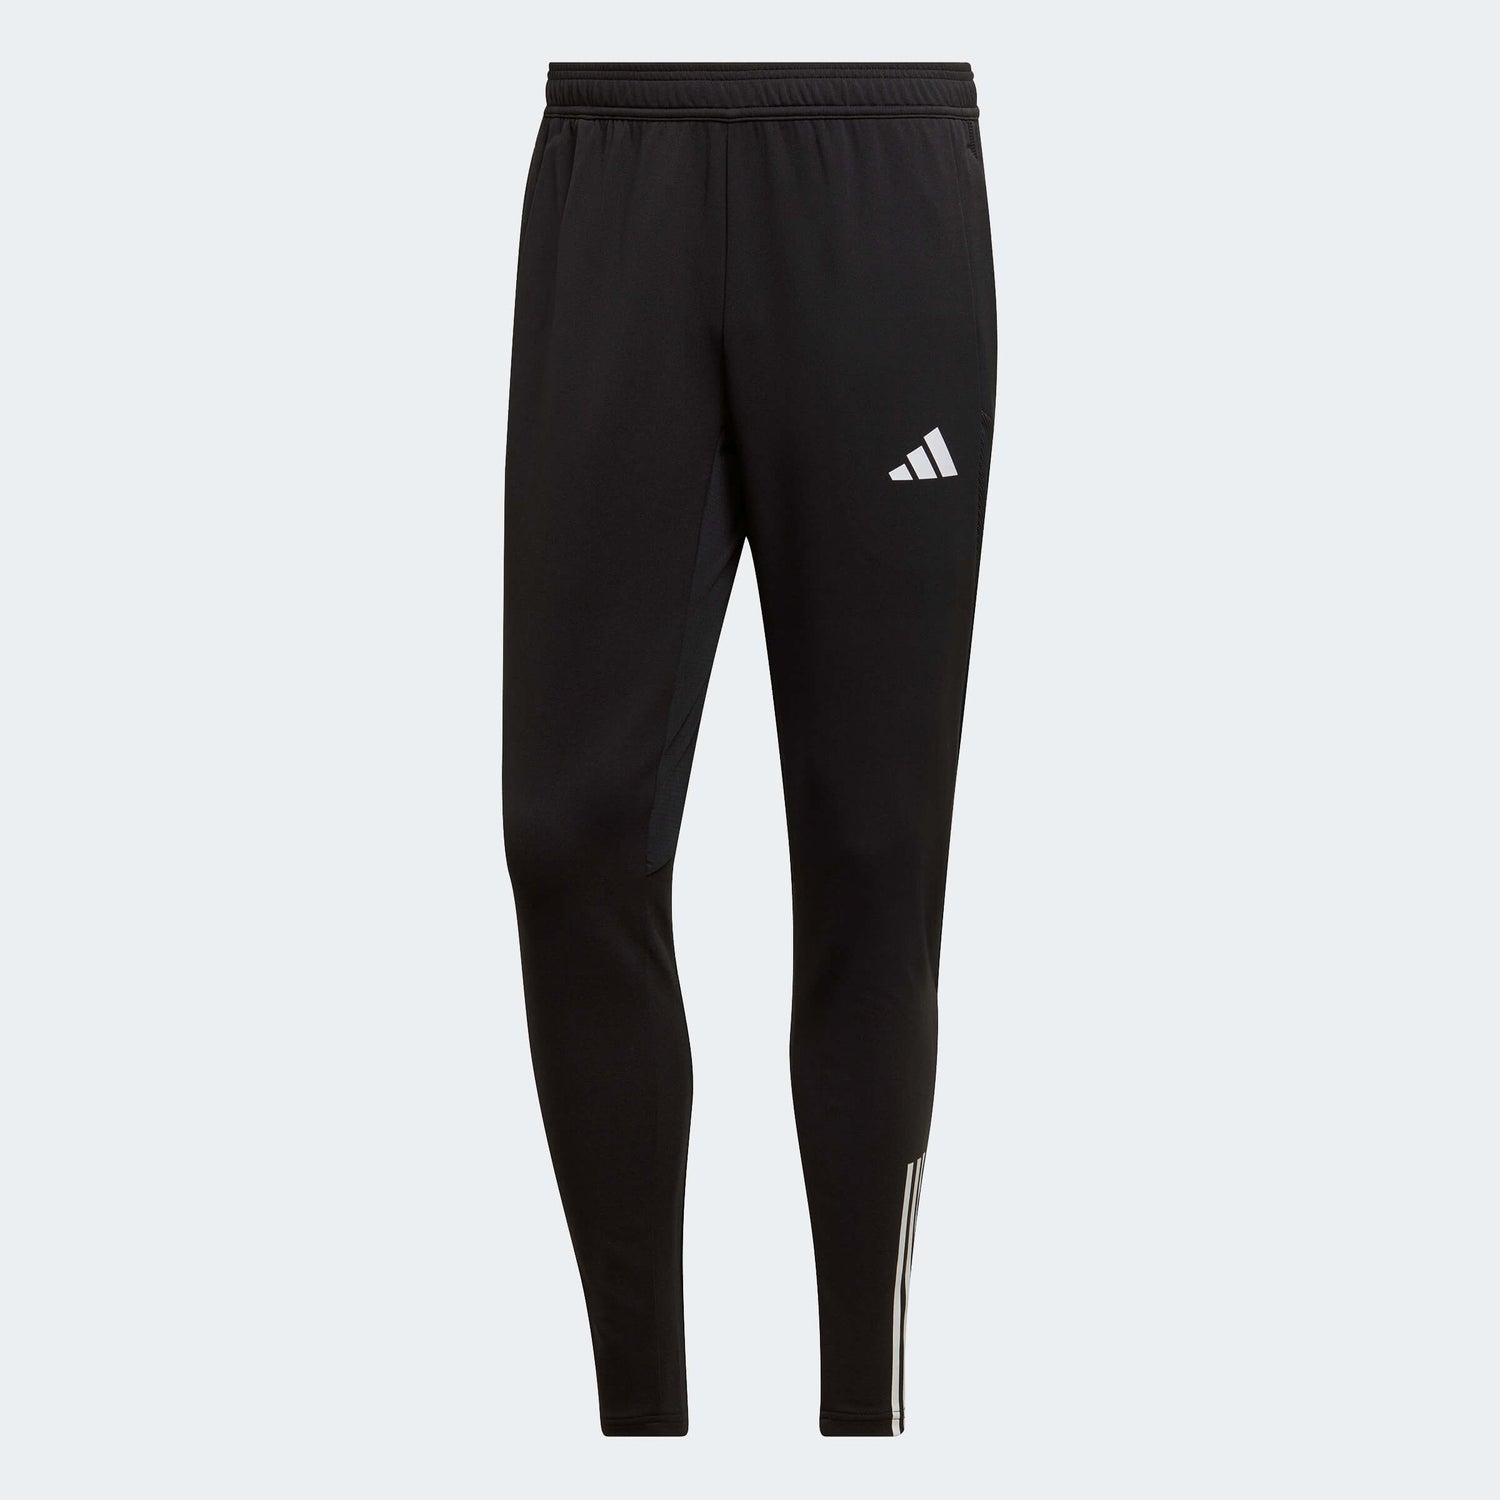 adidas Tiro 23 Men's Competition Training Pants Black (Lateral - Front